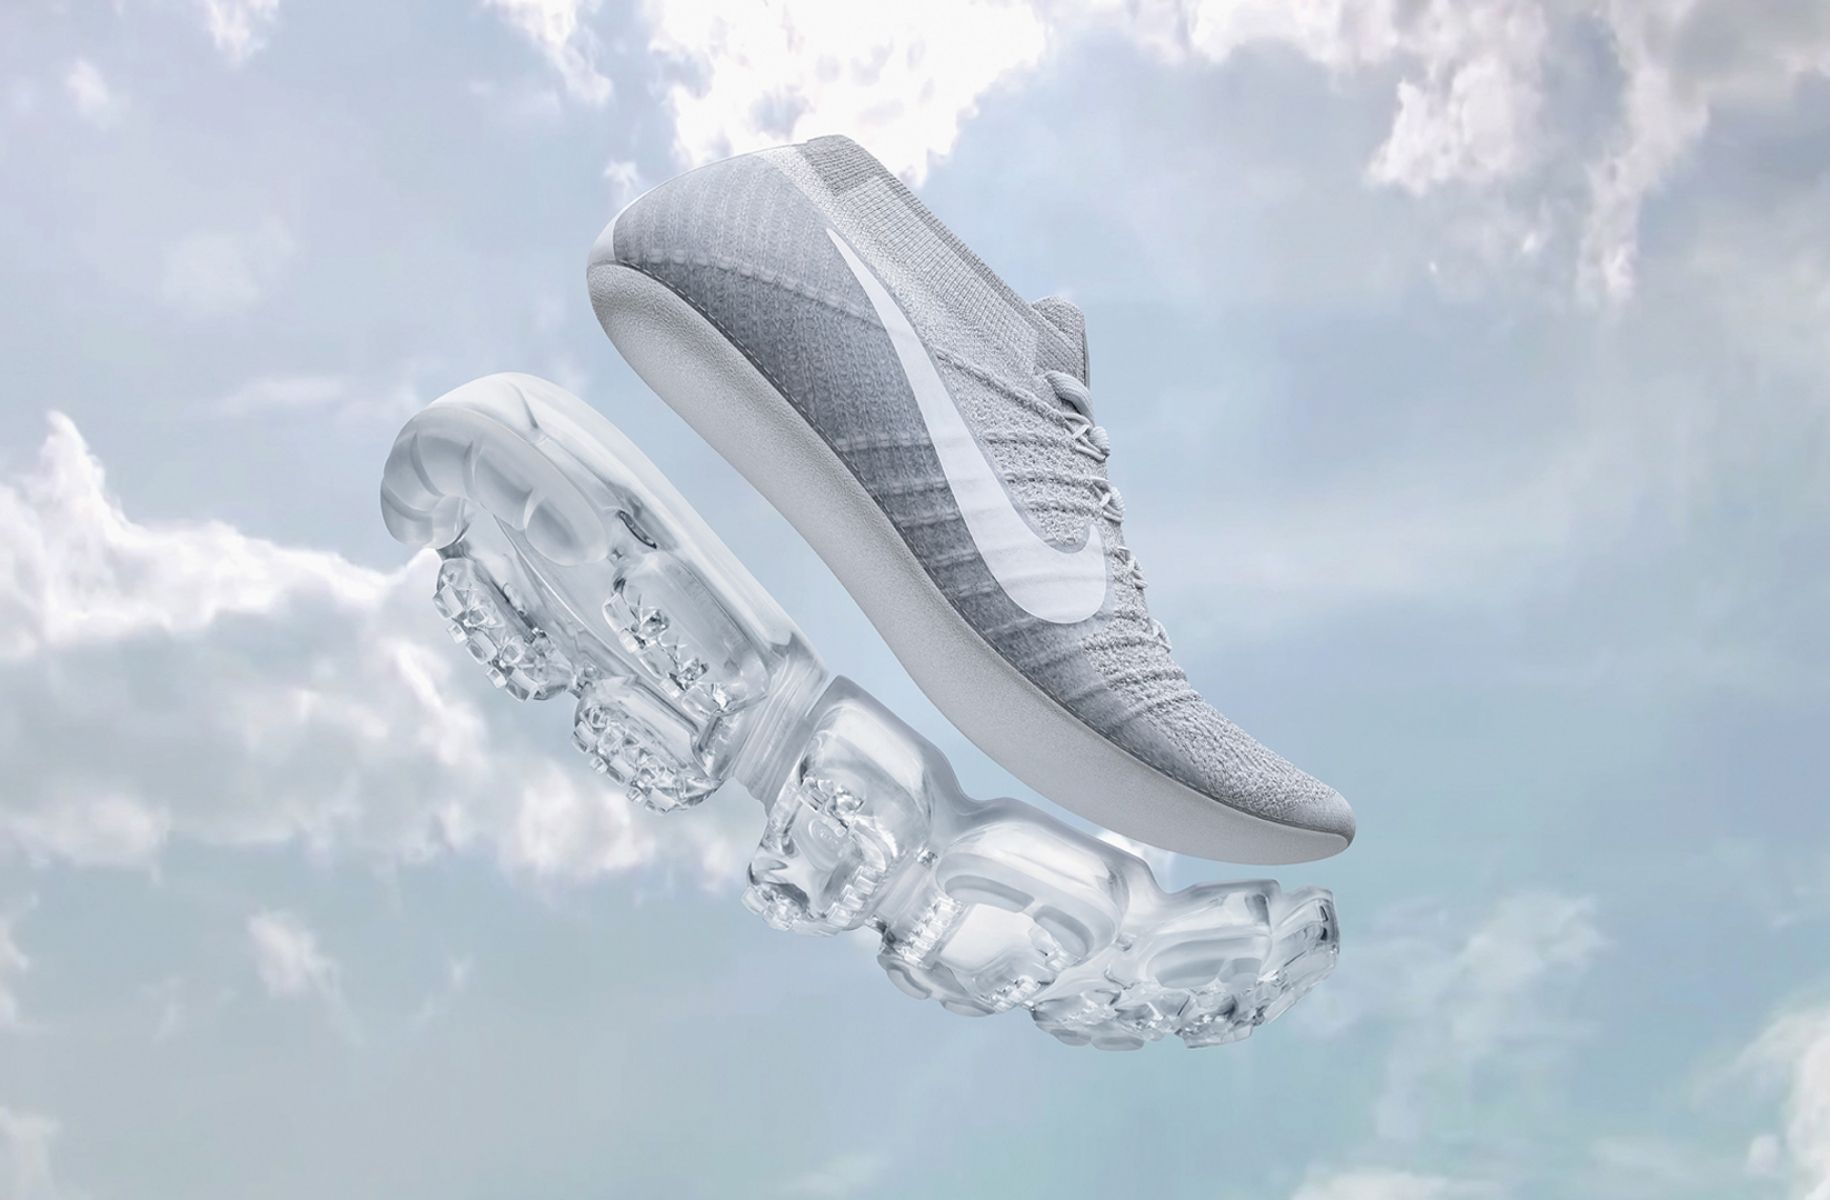 rendering of nike running shoe with air sole detached from bottom. Background is sky with fluffy clouds